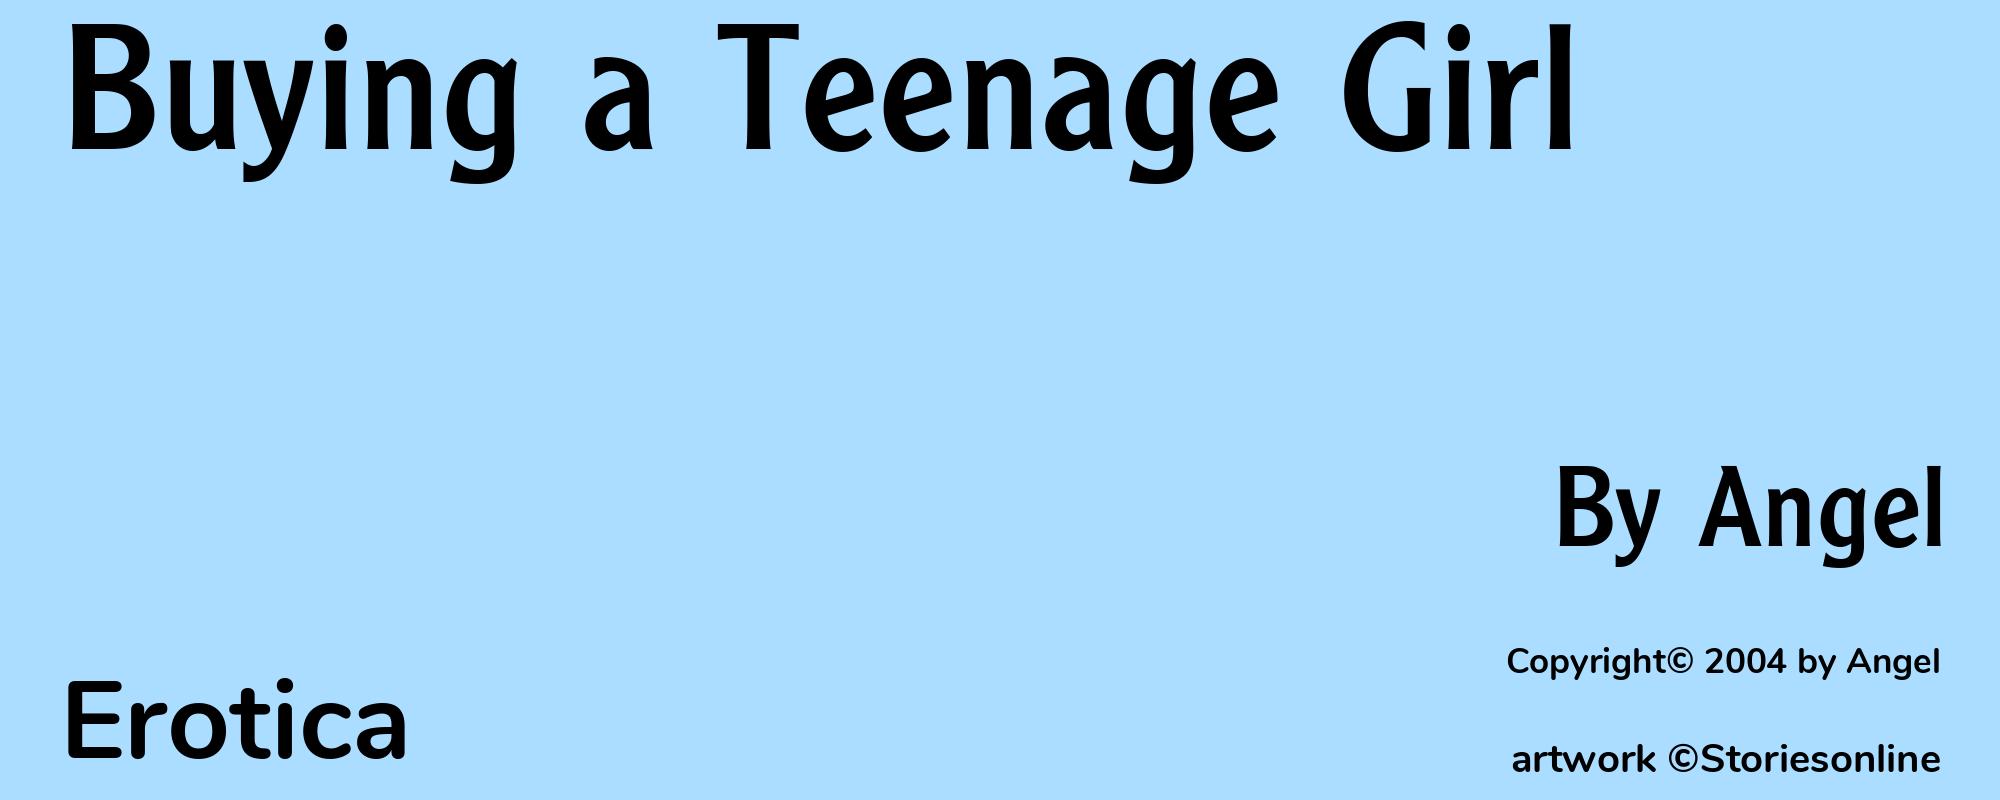 Buying a Teenage Girl - Cover